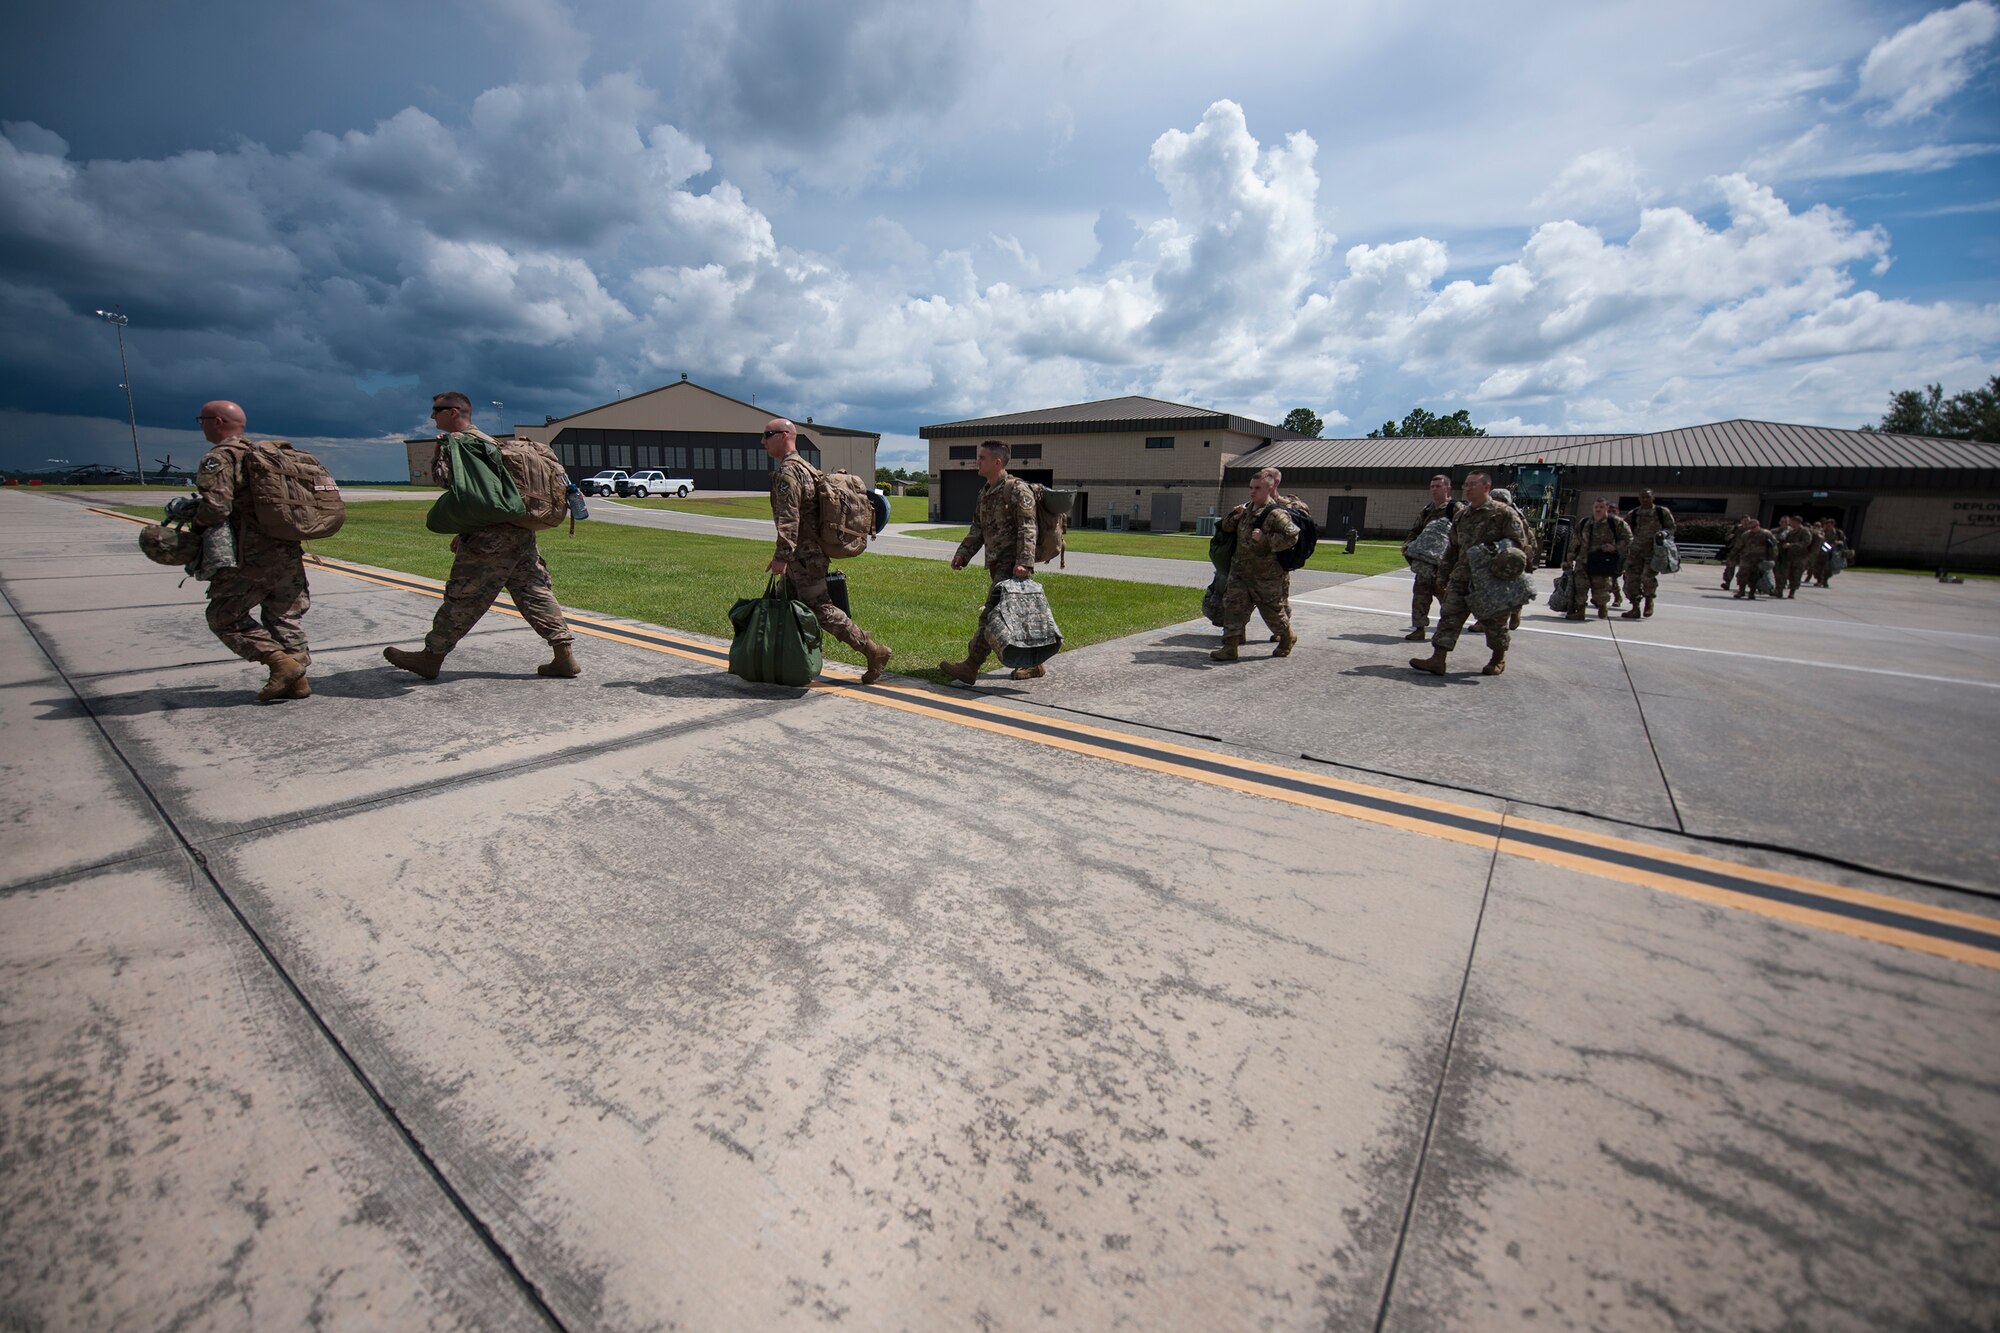 Airmen in support of the 75th Fighter Squadron (FS) board a C-17 Globemaster III, July 5, 2018, at Moody Air Force Base, Ga. The 75th FS and supporting units recently deployed to and undisclosed location in Southwest Asia. While deployed, the 75th FS will provide close air support missions through the A-10 Thunderbolt II, which is specifically designed for long loiter time, accurate weapons delivery, austere field capability and survivability. (U.S. Air Force photo by Airman Taryn Butler)